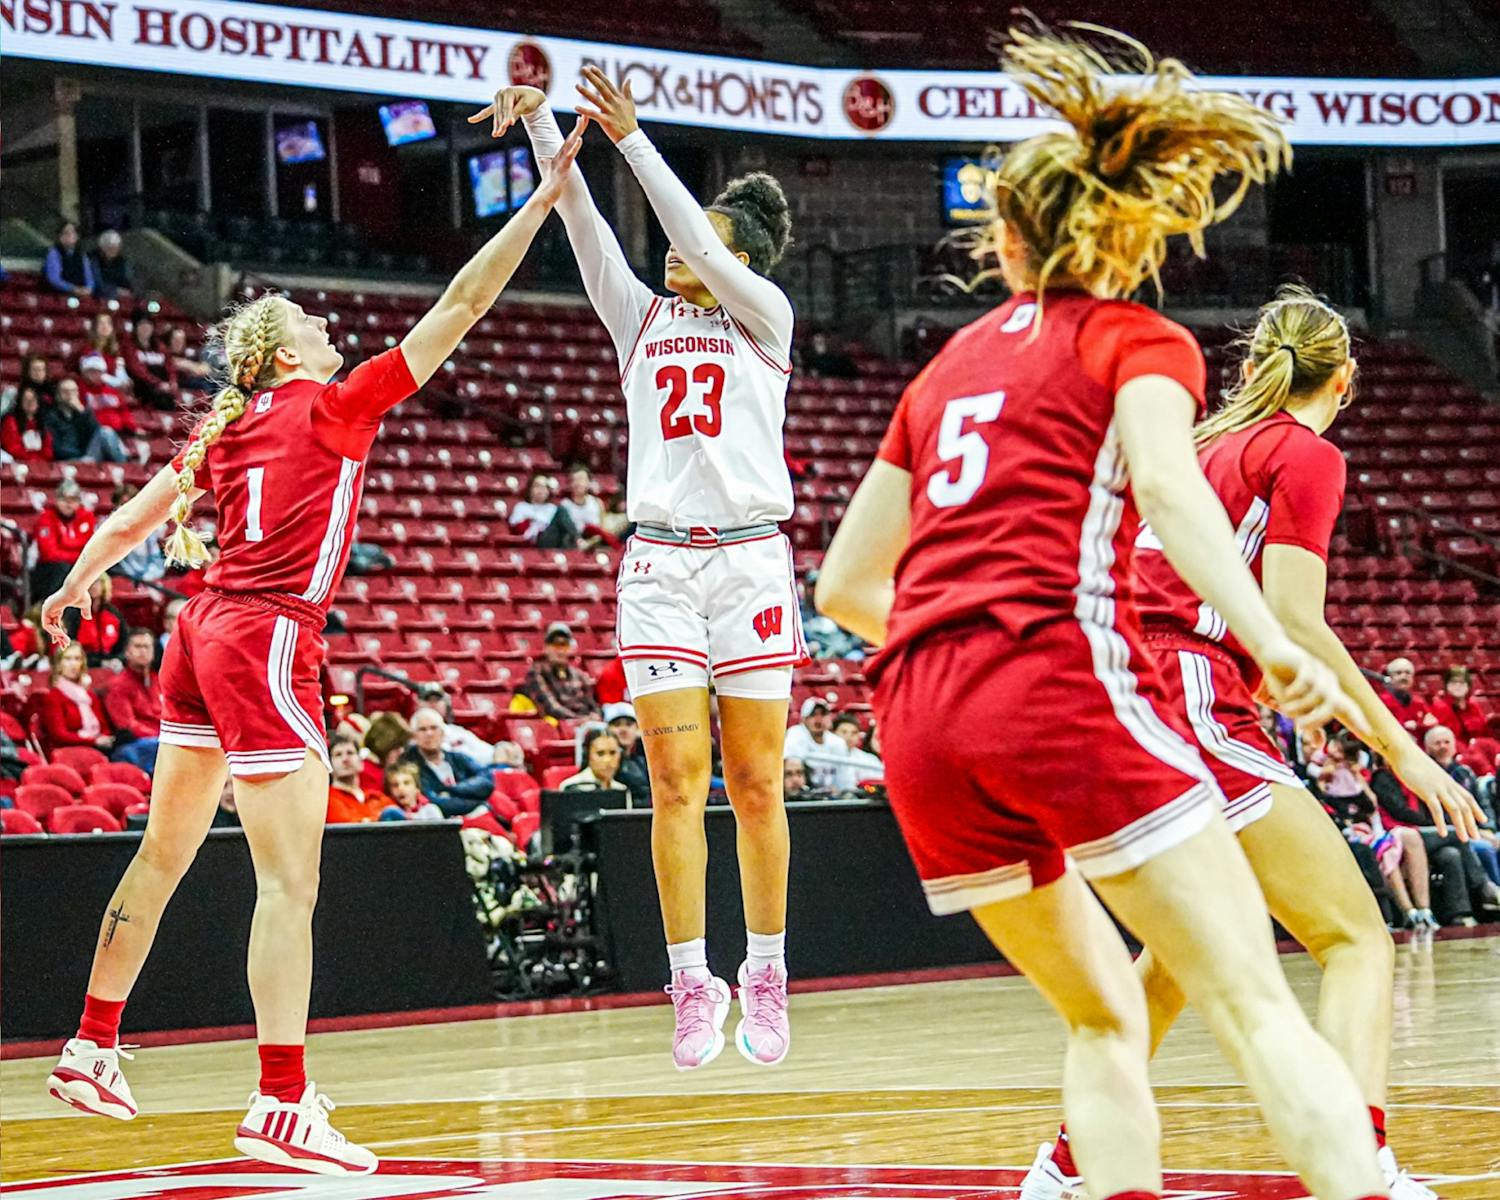 PHOTOS: Badgers lose to Indiana Hoosiers in a tough game